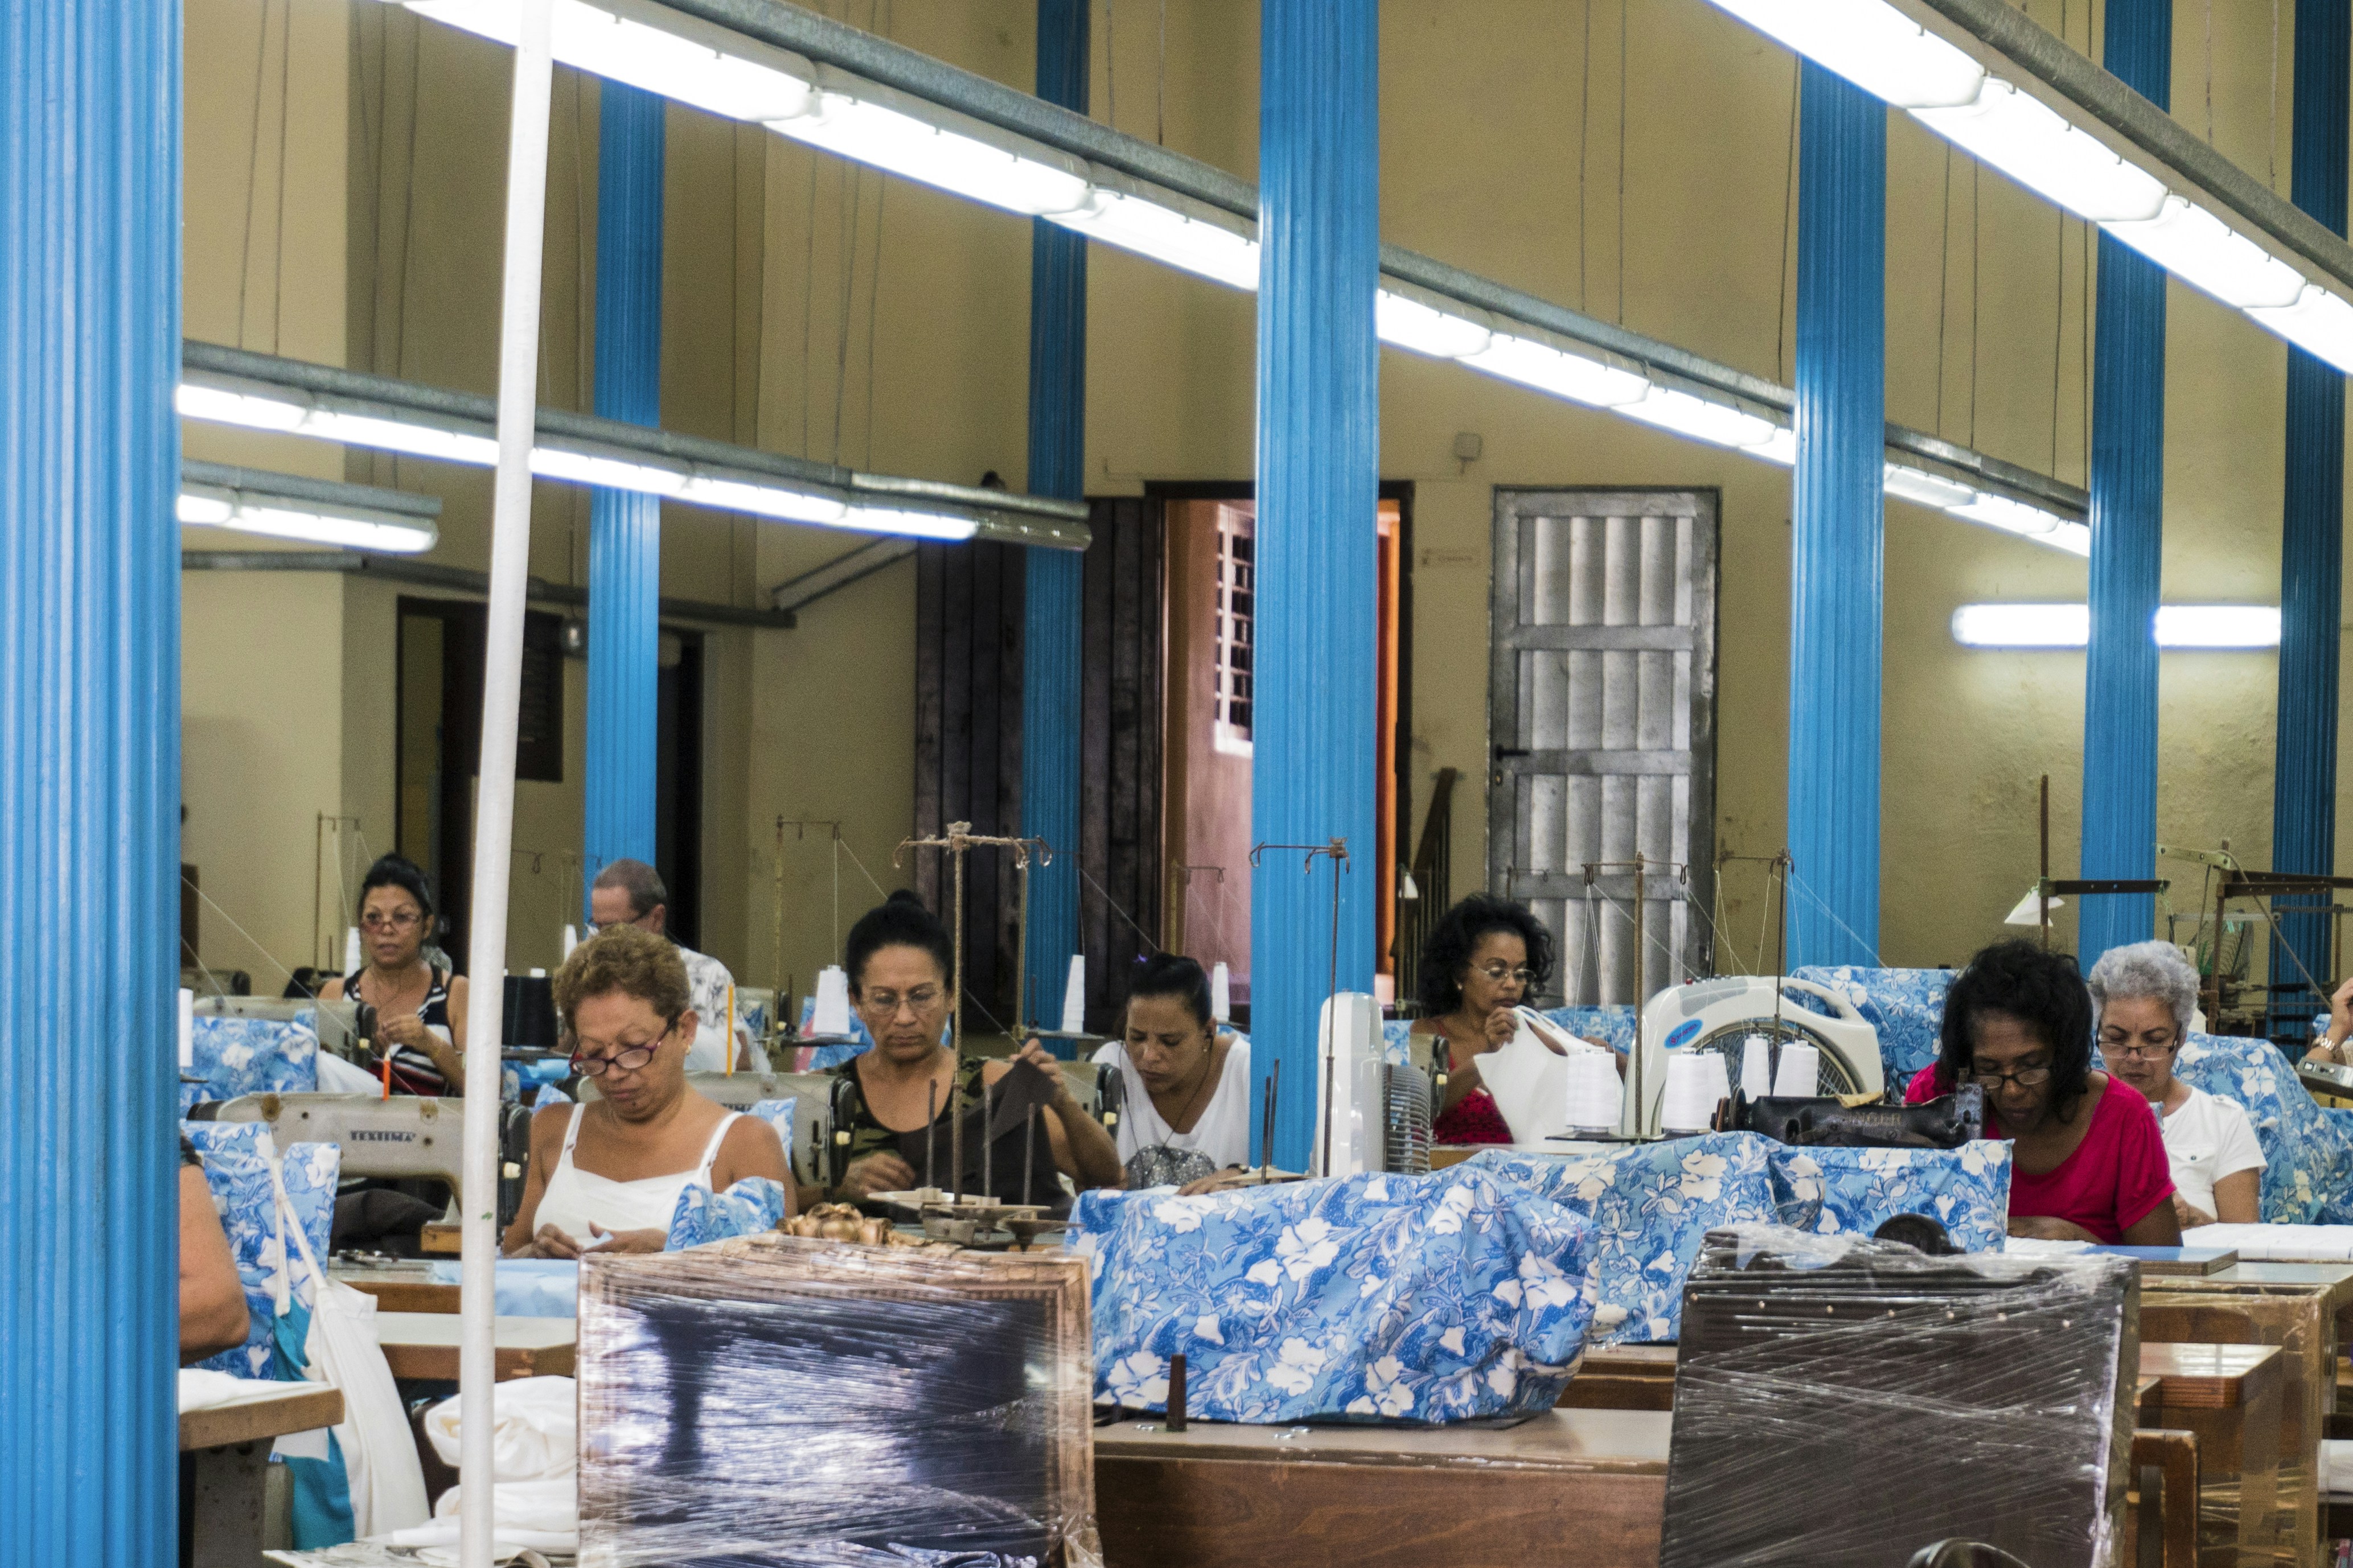 Chair making factory with workers in Havanna